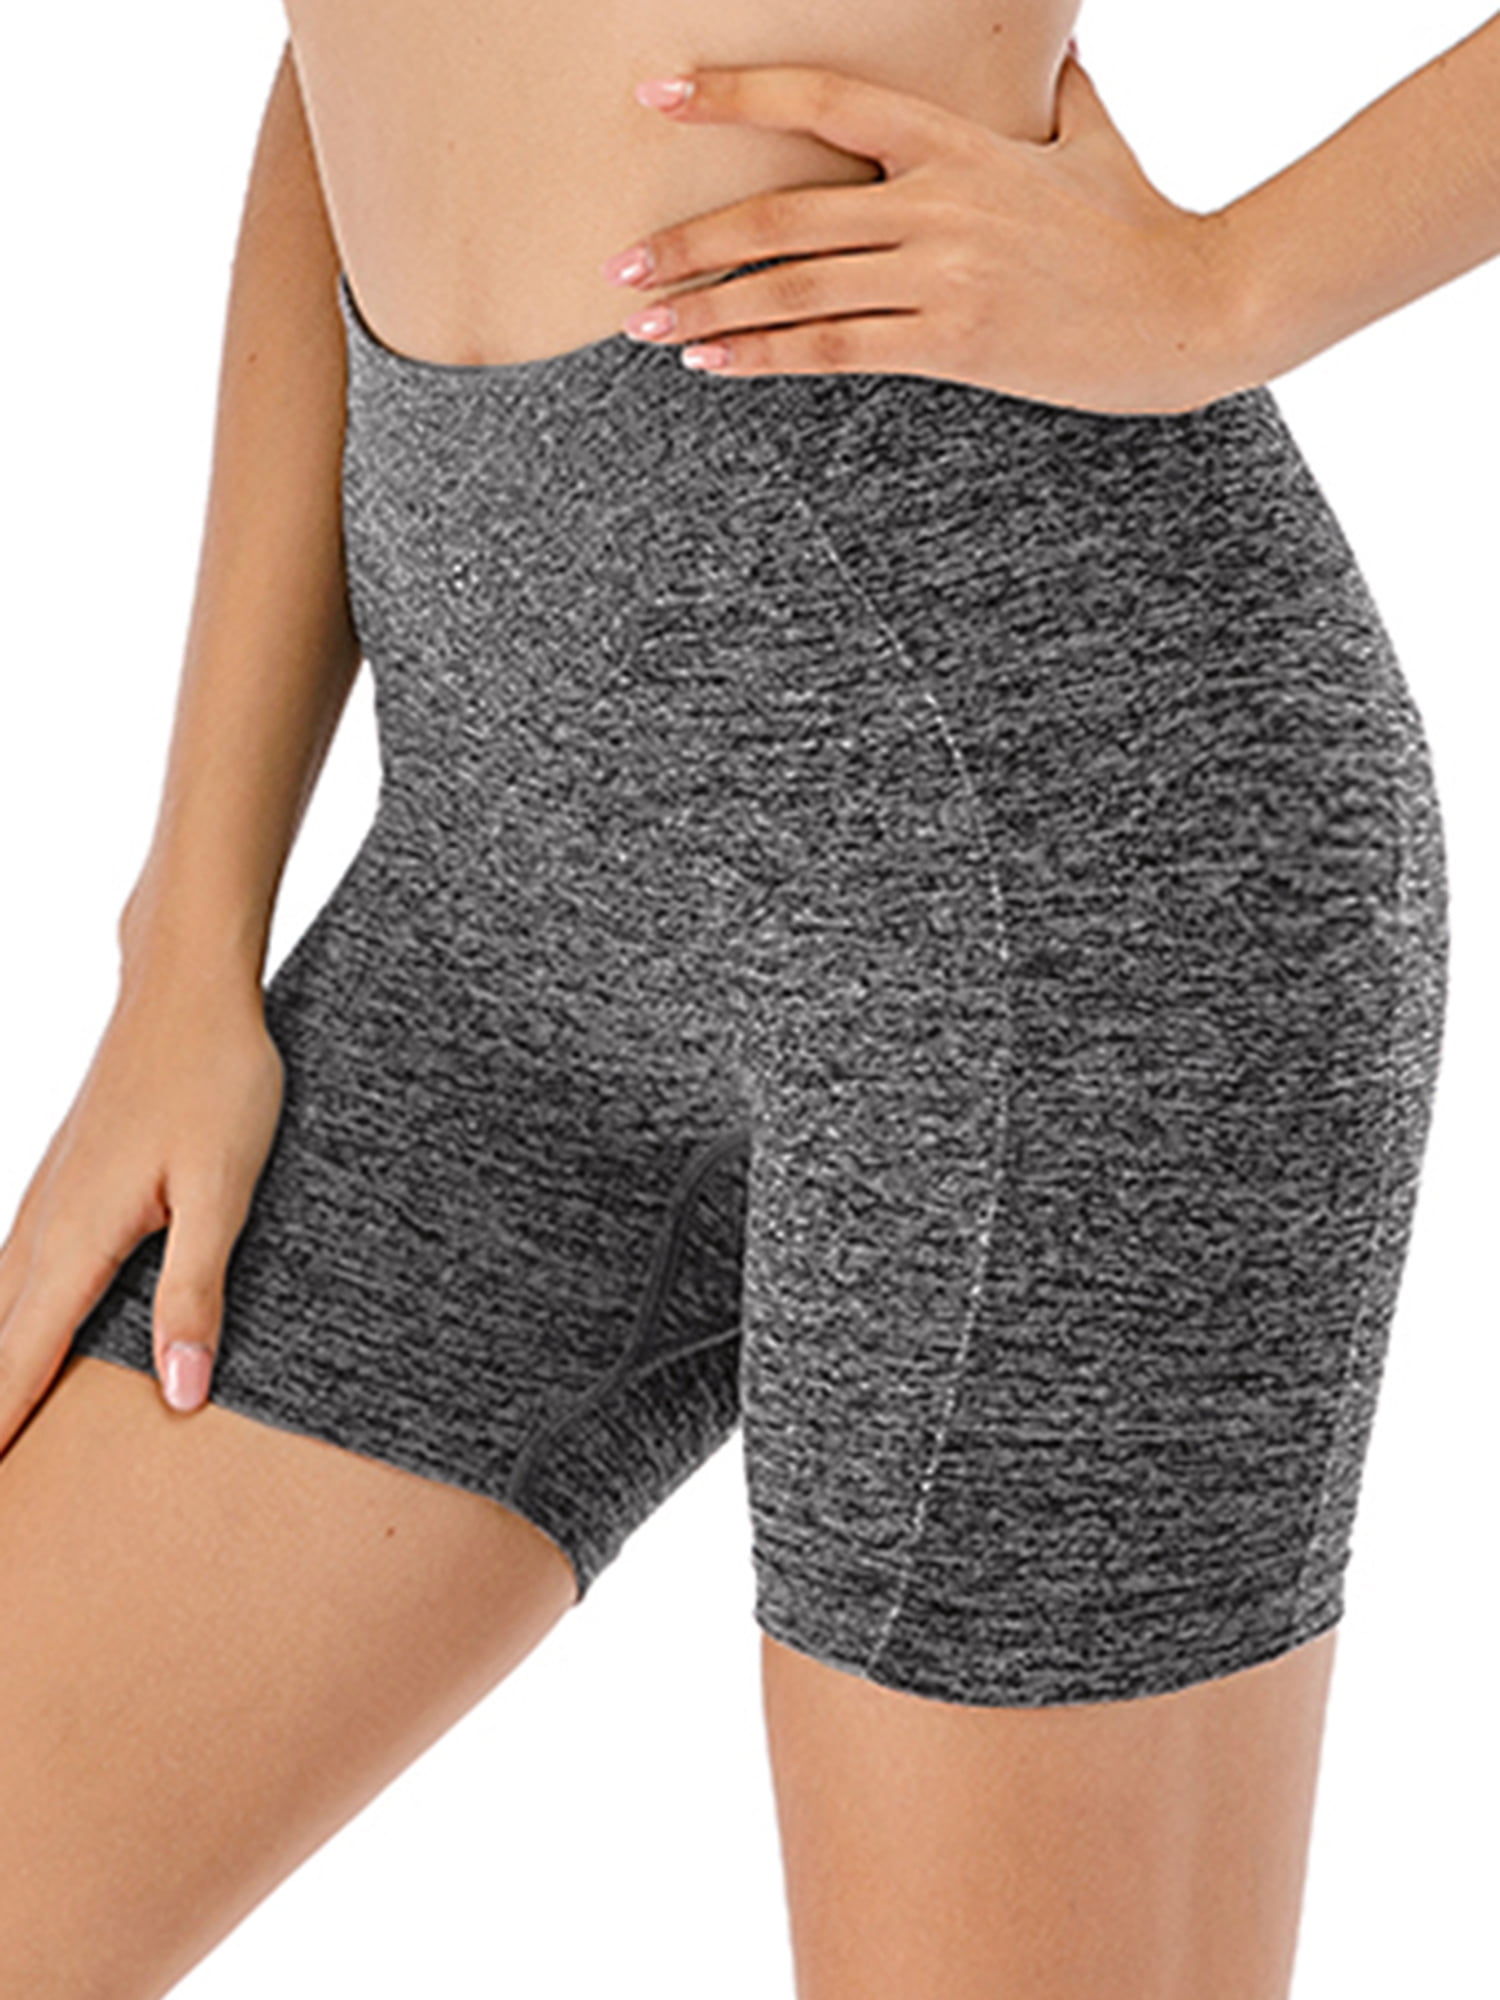 10 Inseam Workout Running Athletic Yoga Shorts 5“ 8 ODODOS Women's High Waisted Biker Shorts with Out Pockets 